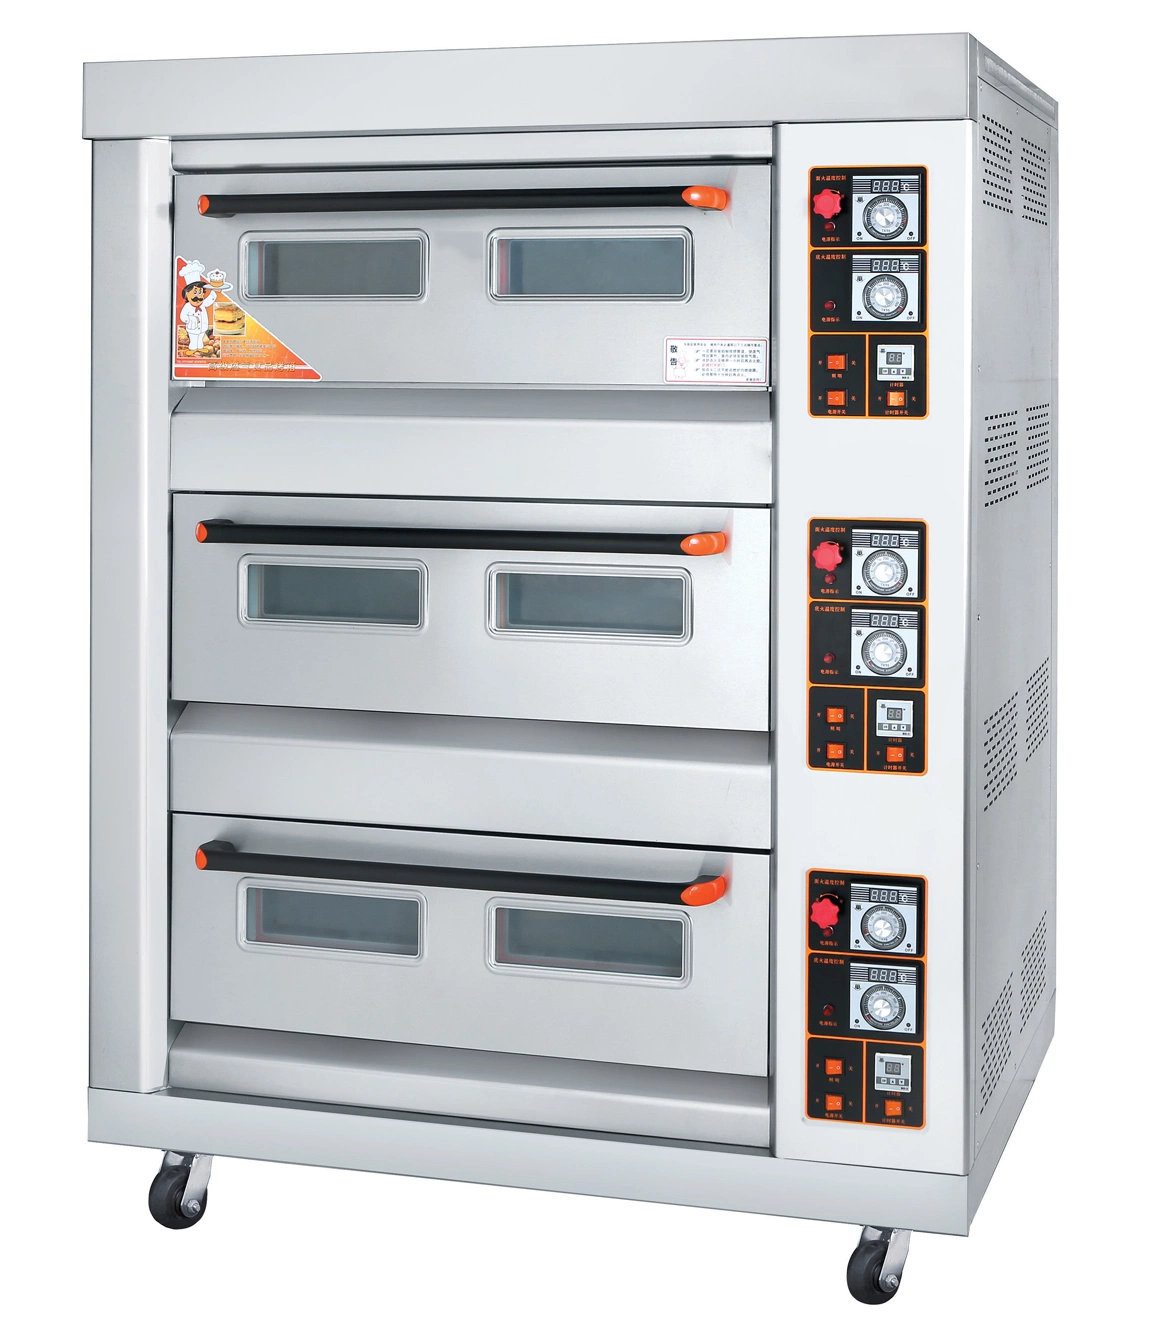 Stainless Steel Standard Electric Oven